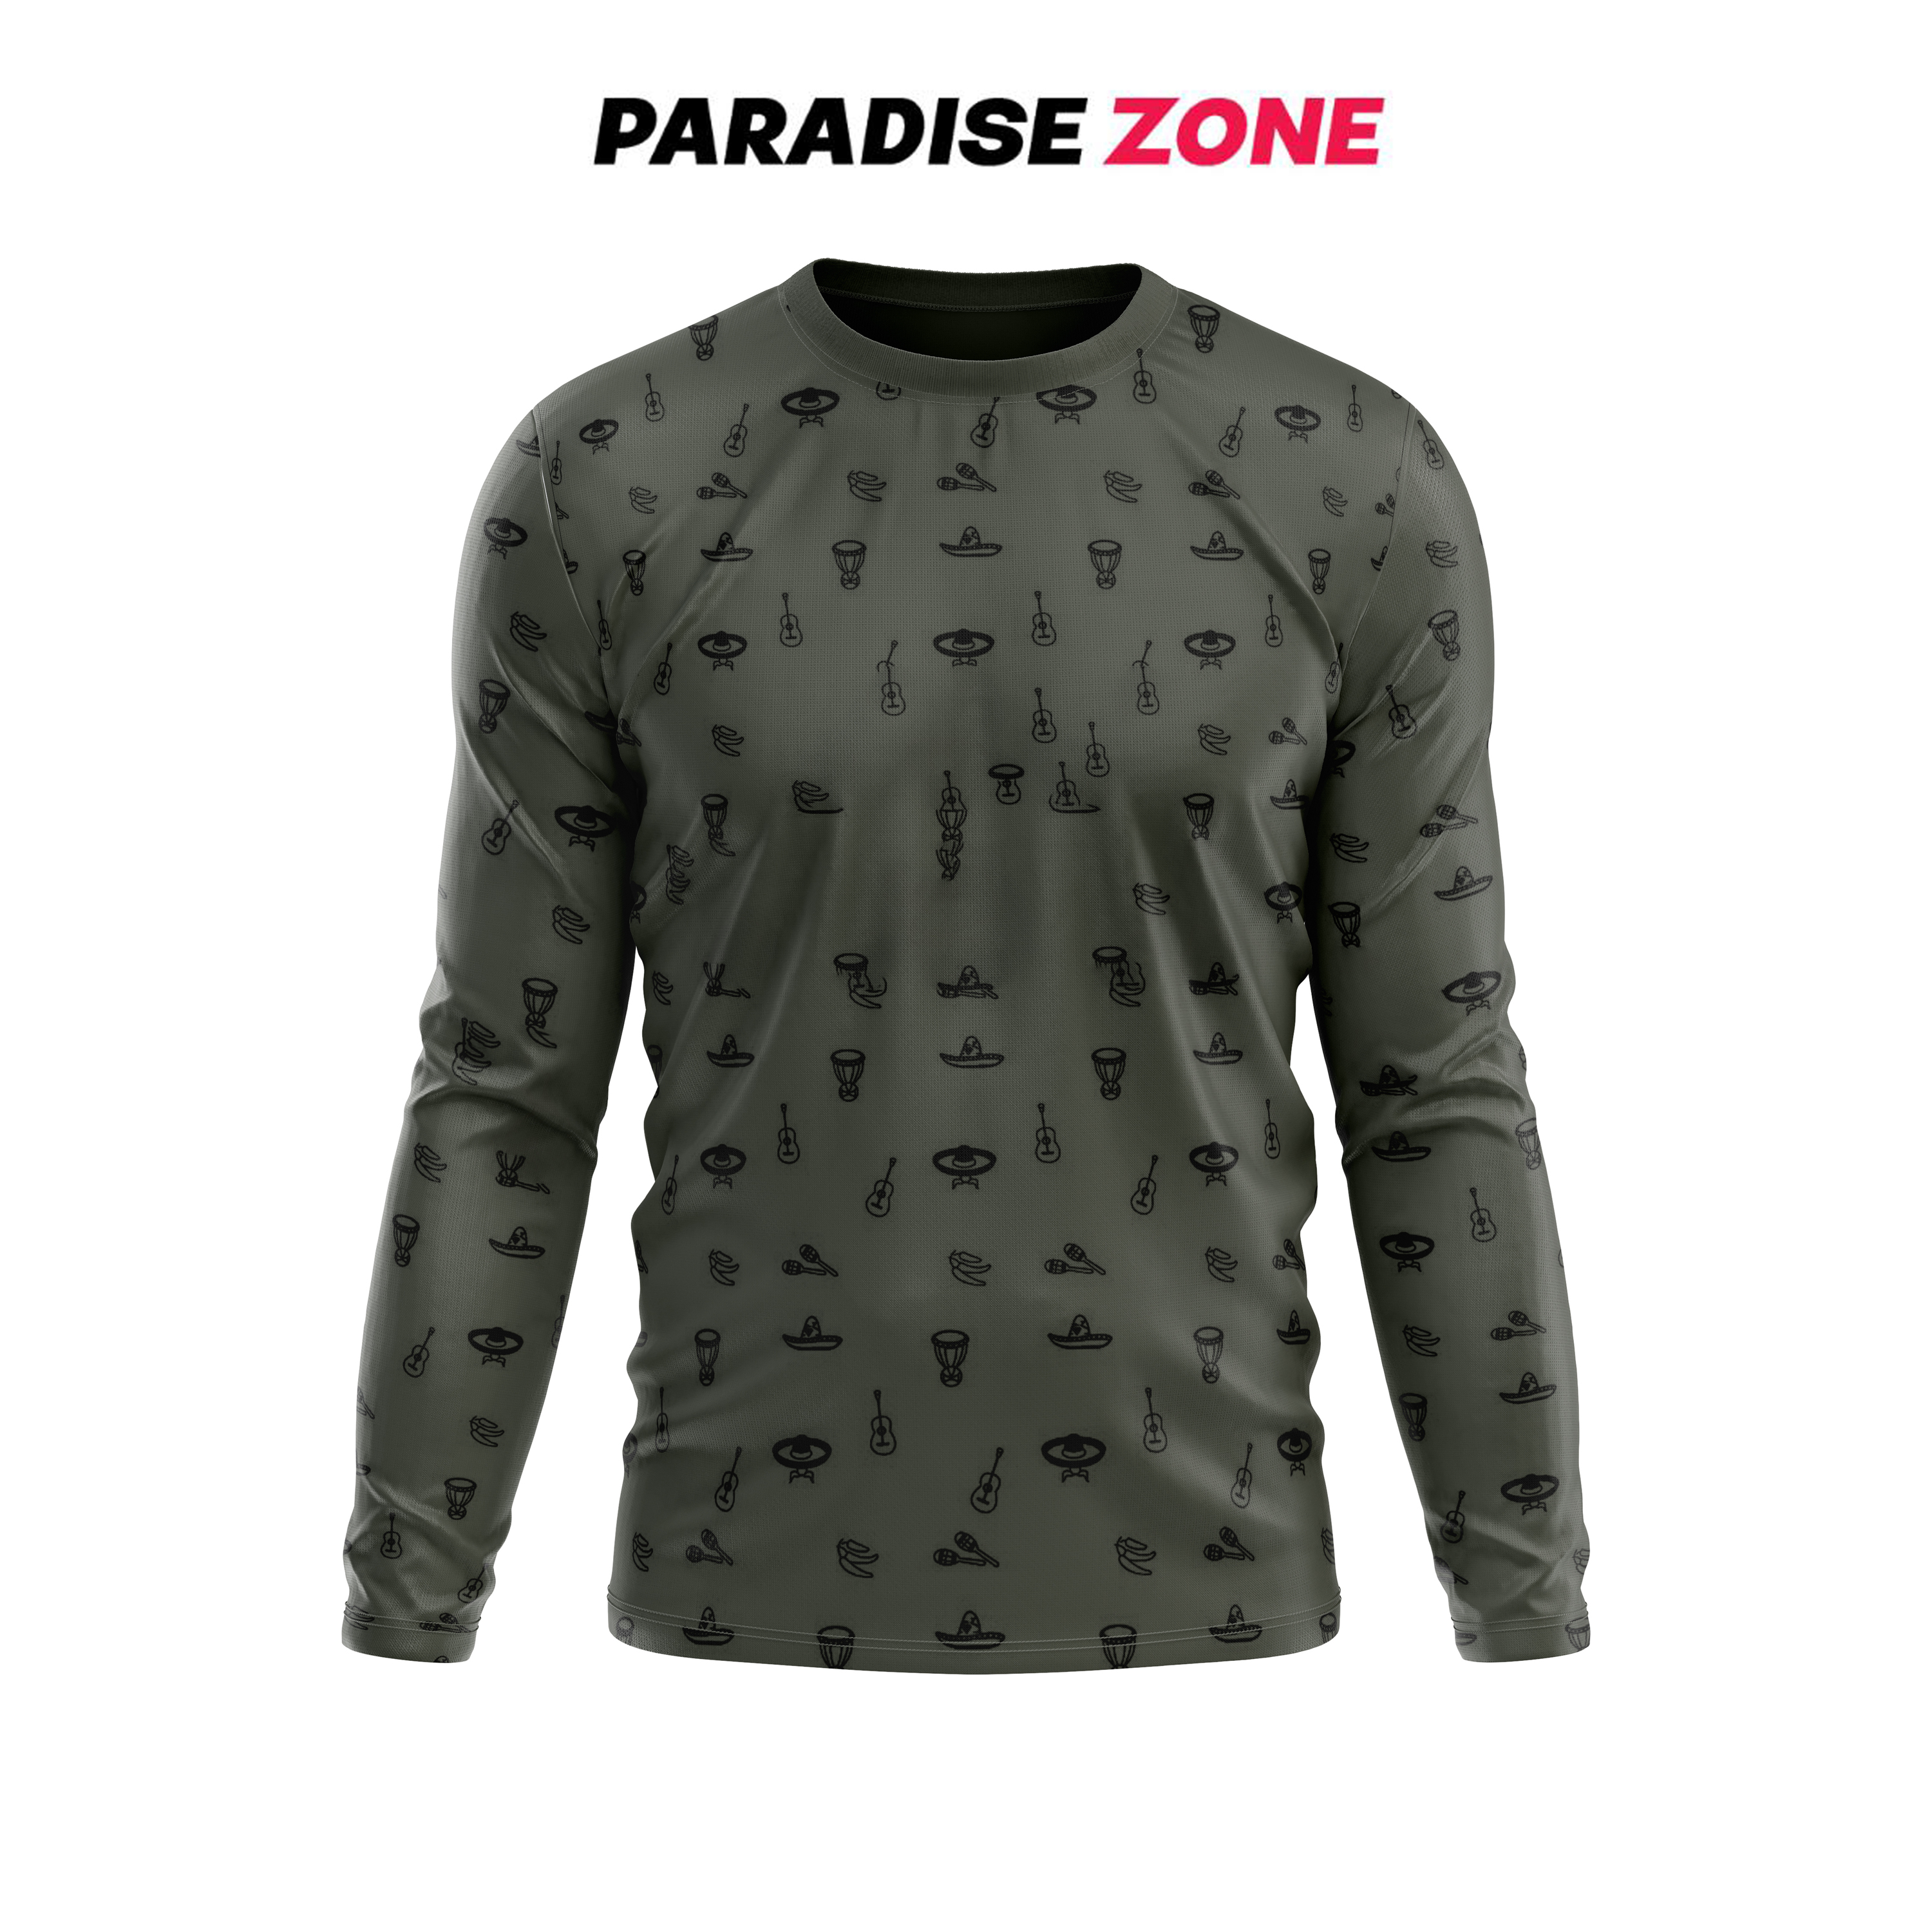 New Long Sleeves Allover Printed Casual Summer Fashion Tshirt For Men